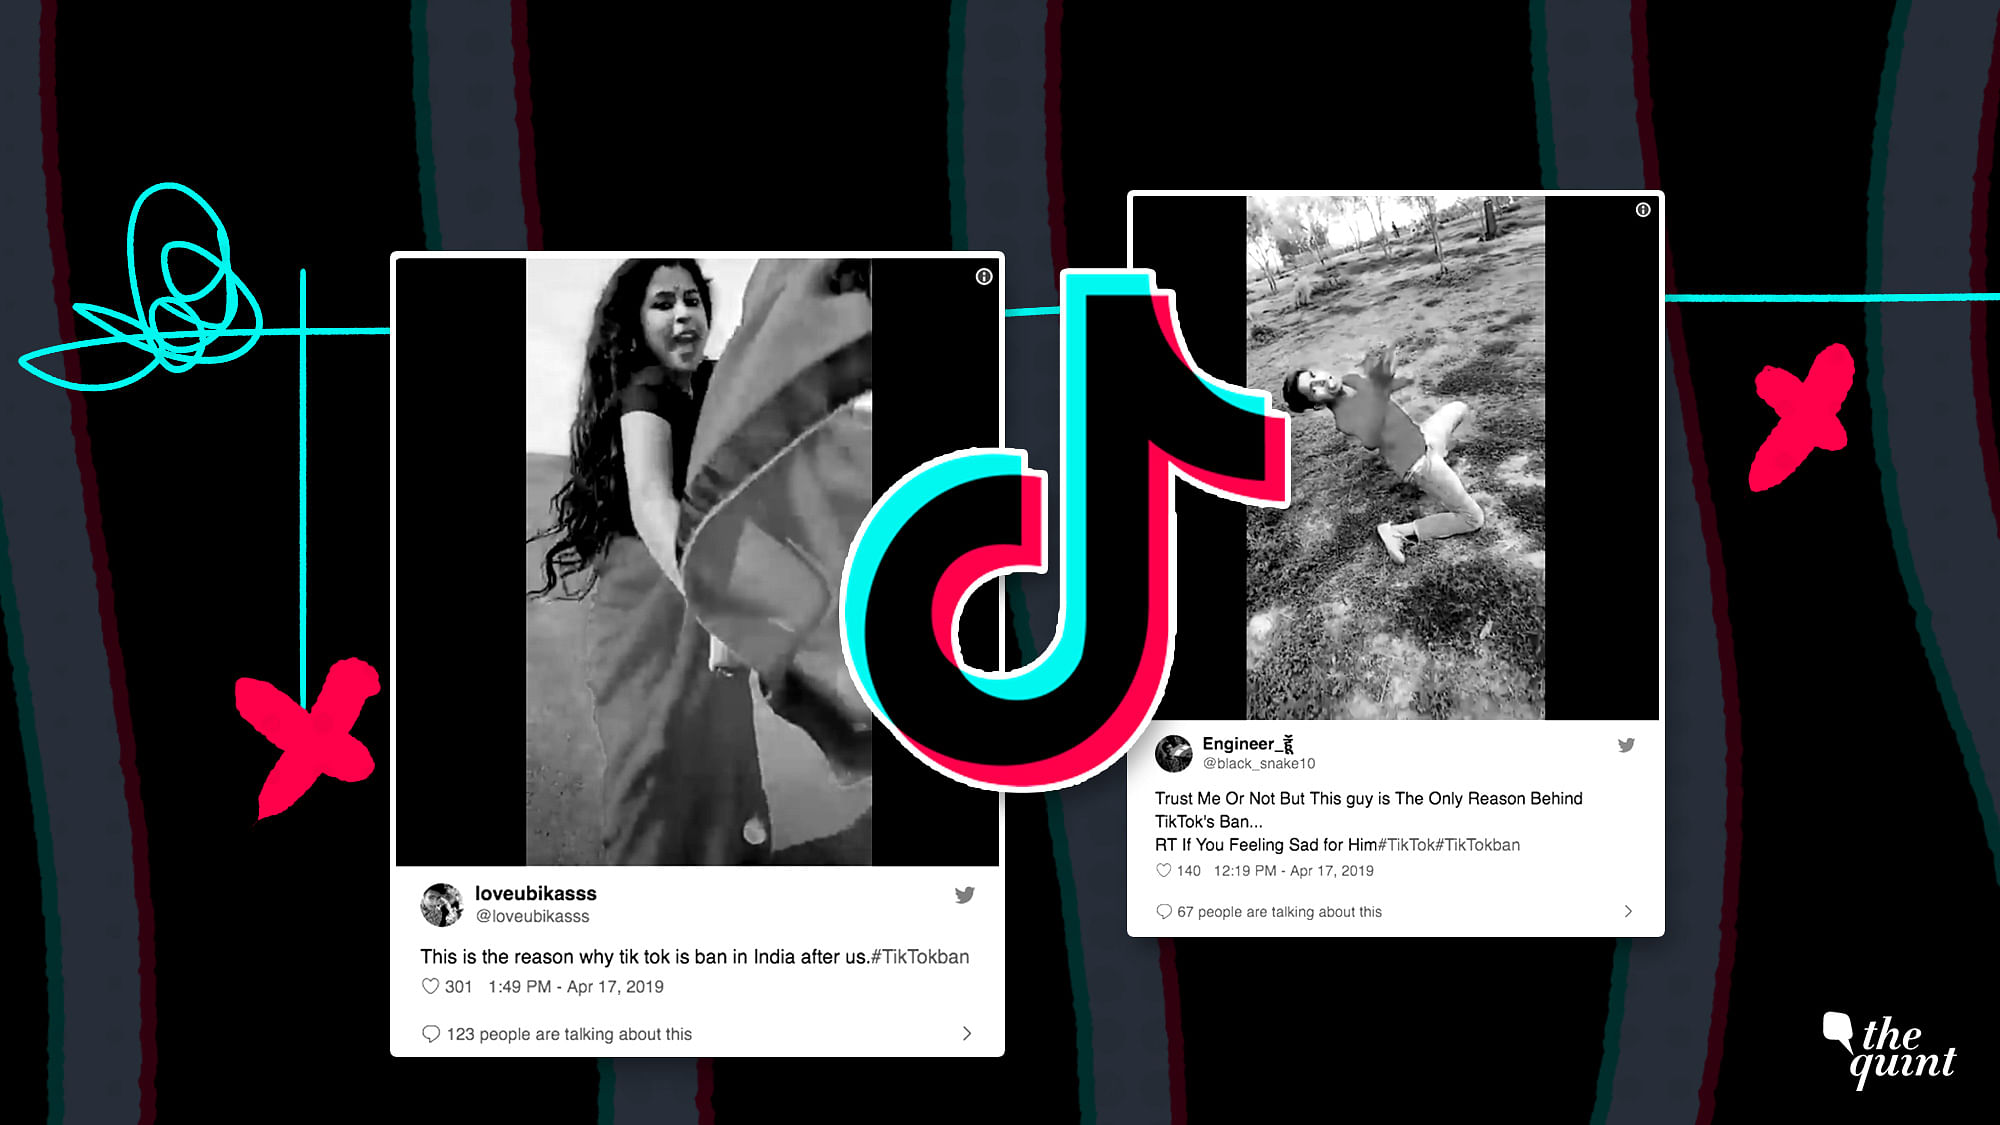 TikTok has been asked to fix its content policies in the country.